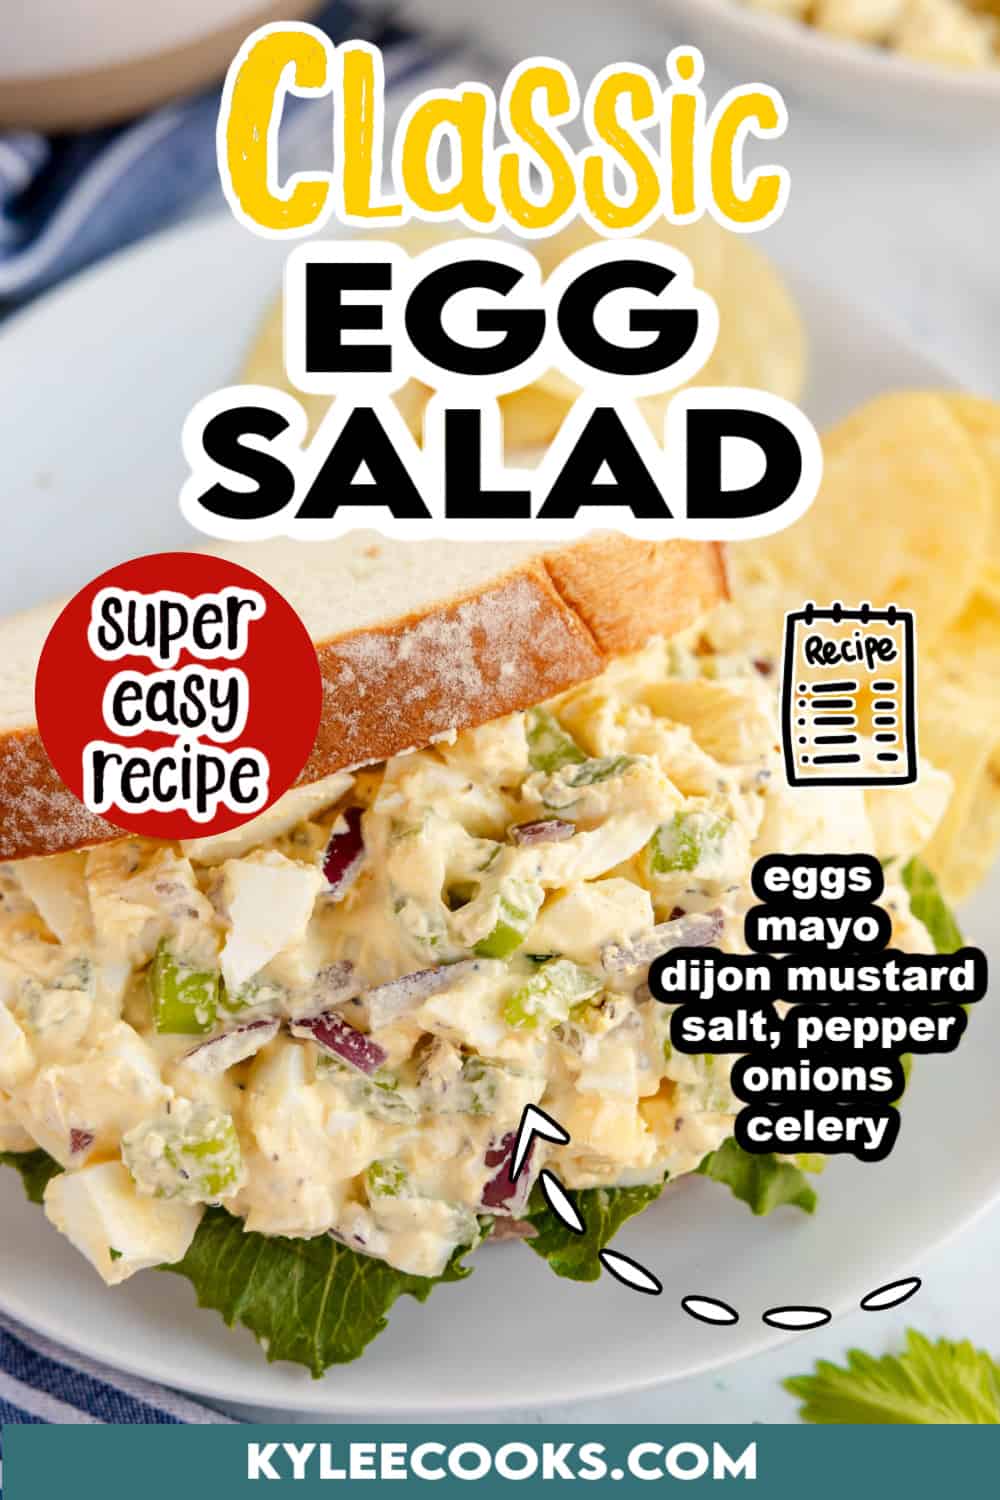 egg salad in a sandwich with lettuce with recipe name and ingredients overlaid in text.